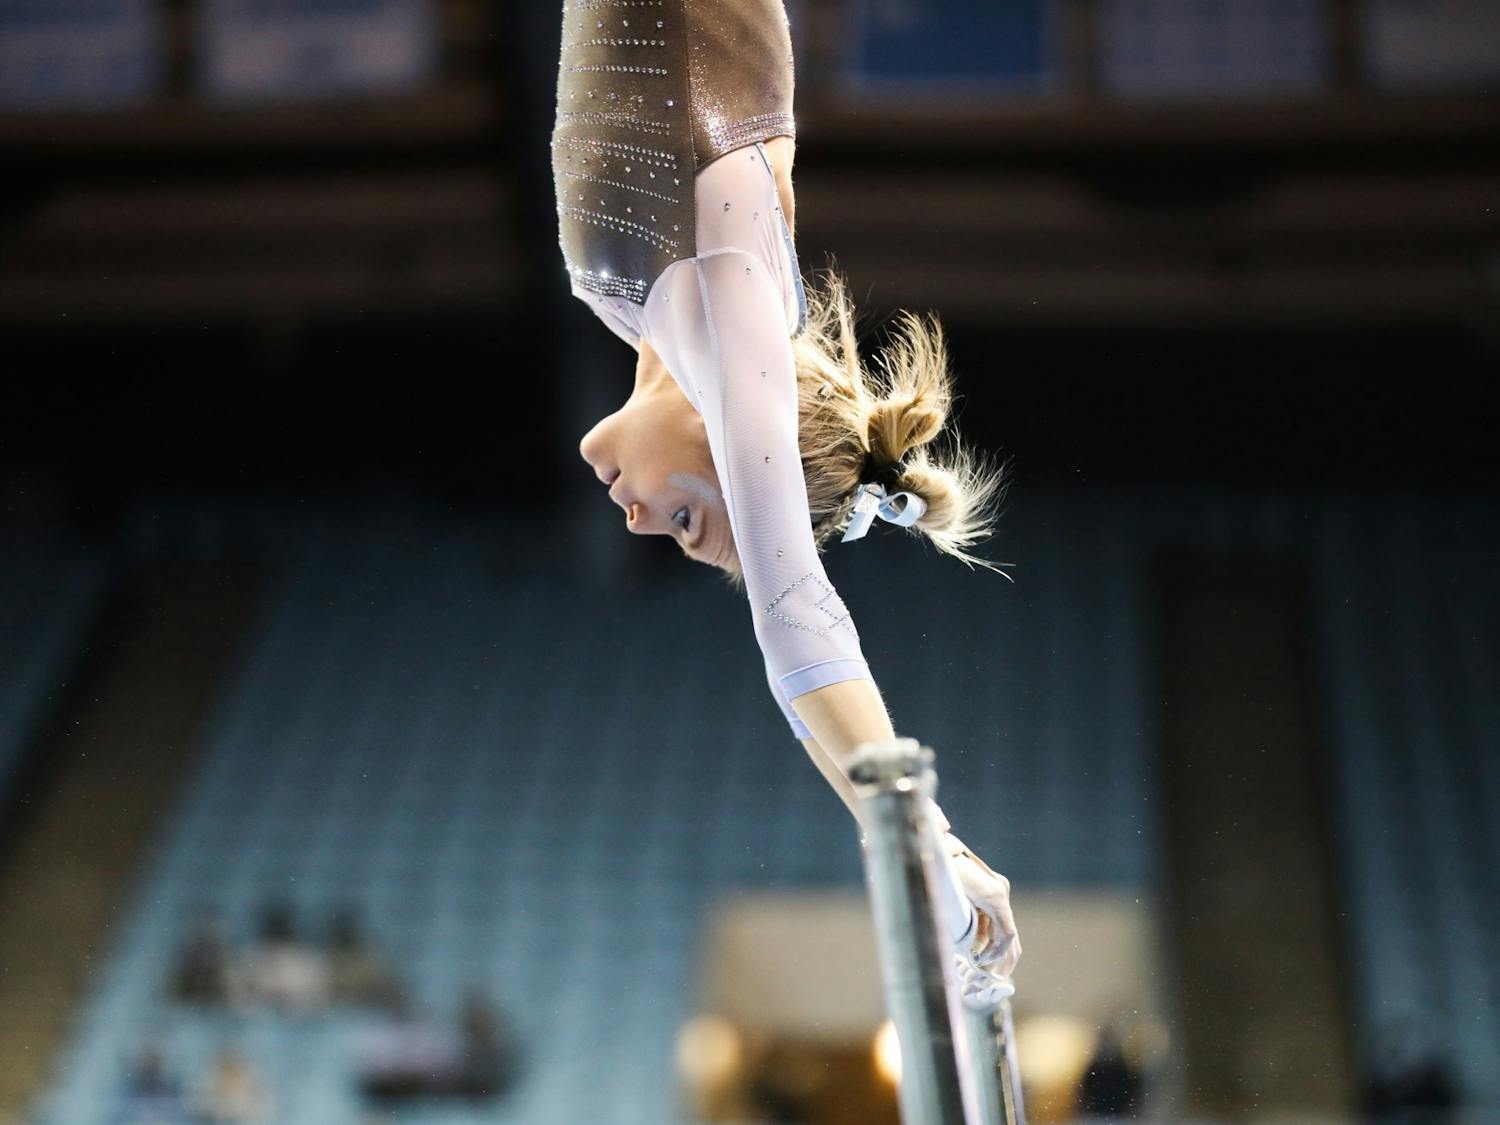 Junior Elizabeth Culton First-year competes on uneven bars during UNC gymnastics' home meet at Carmichael Arena on Friday, Jan. 28, 2022. Culton scored a 9.850, tying her for first on bars.